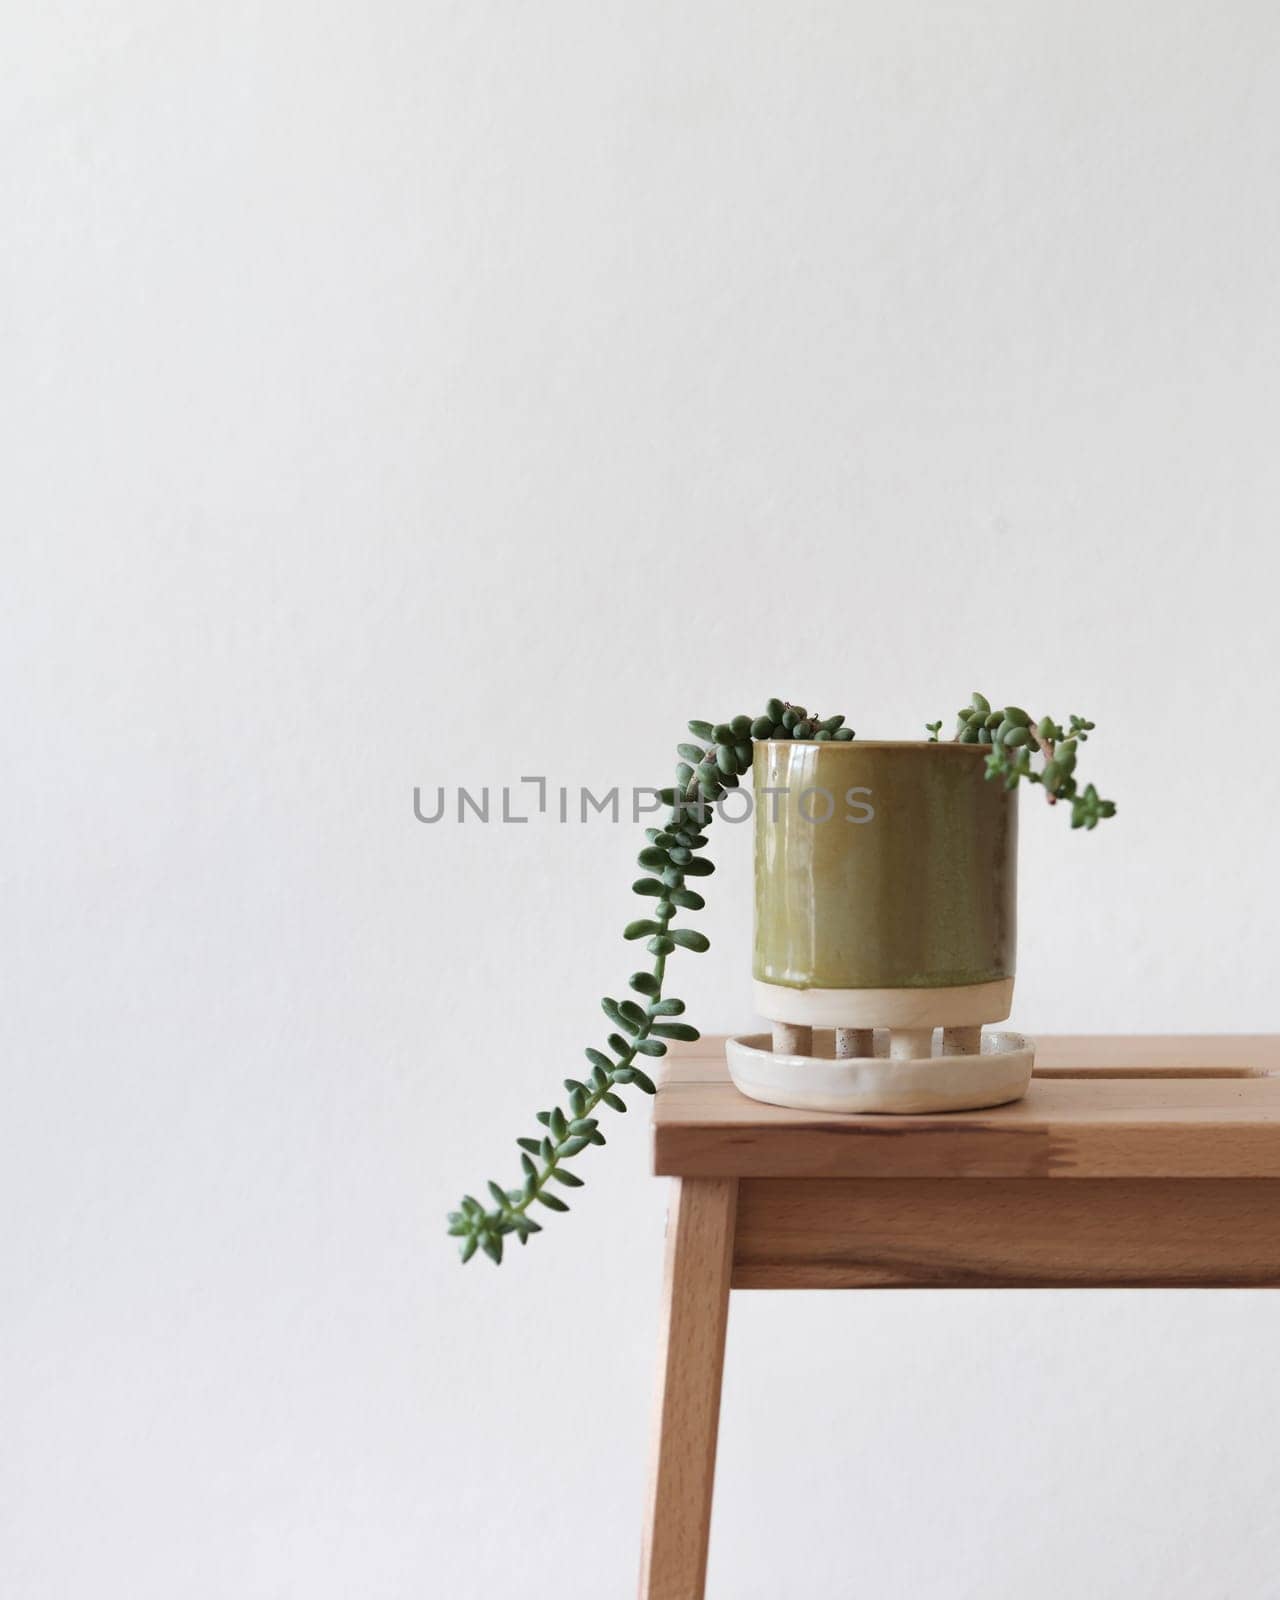 Minimalist home decoration with trailing succulent on wooden stool by apavlin